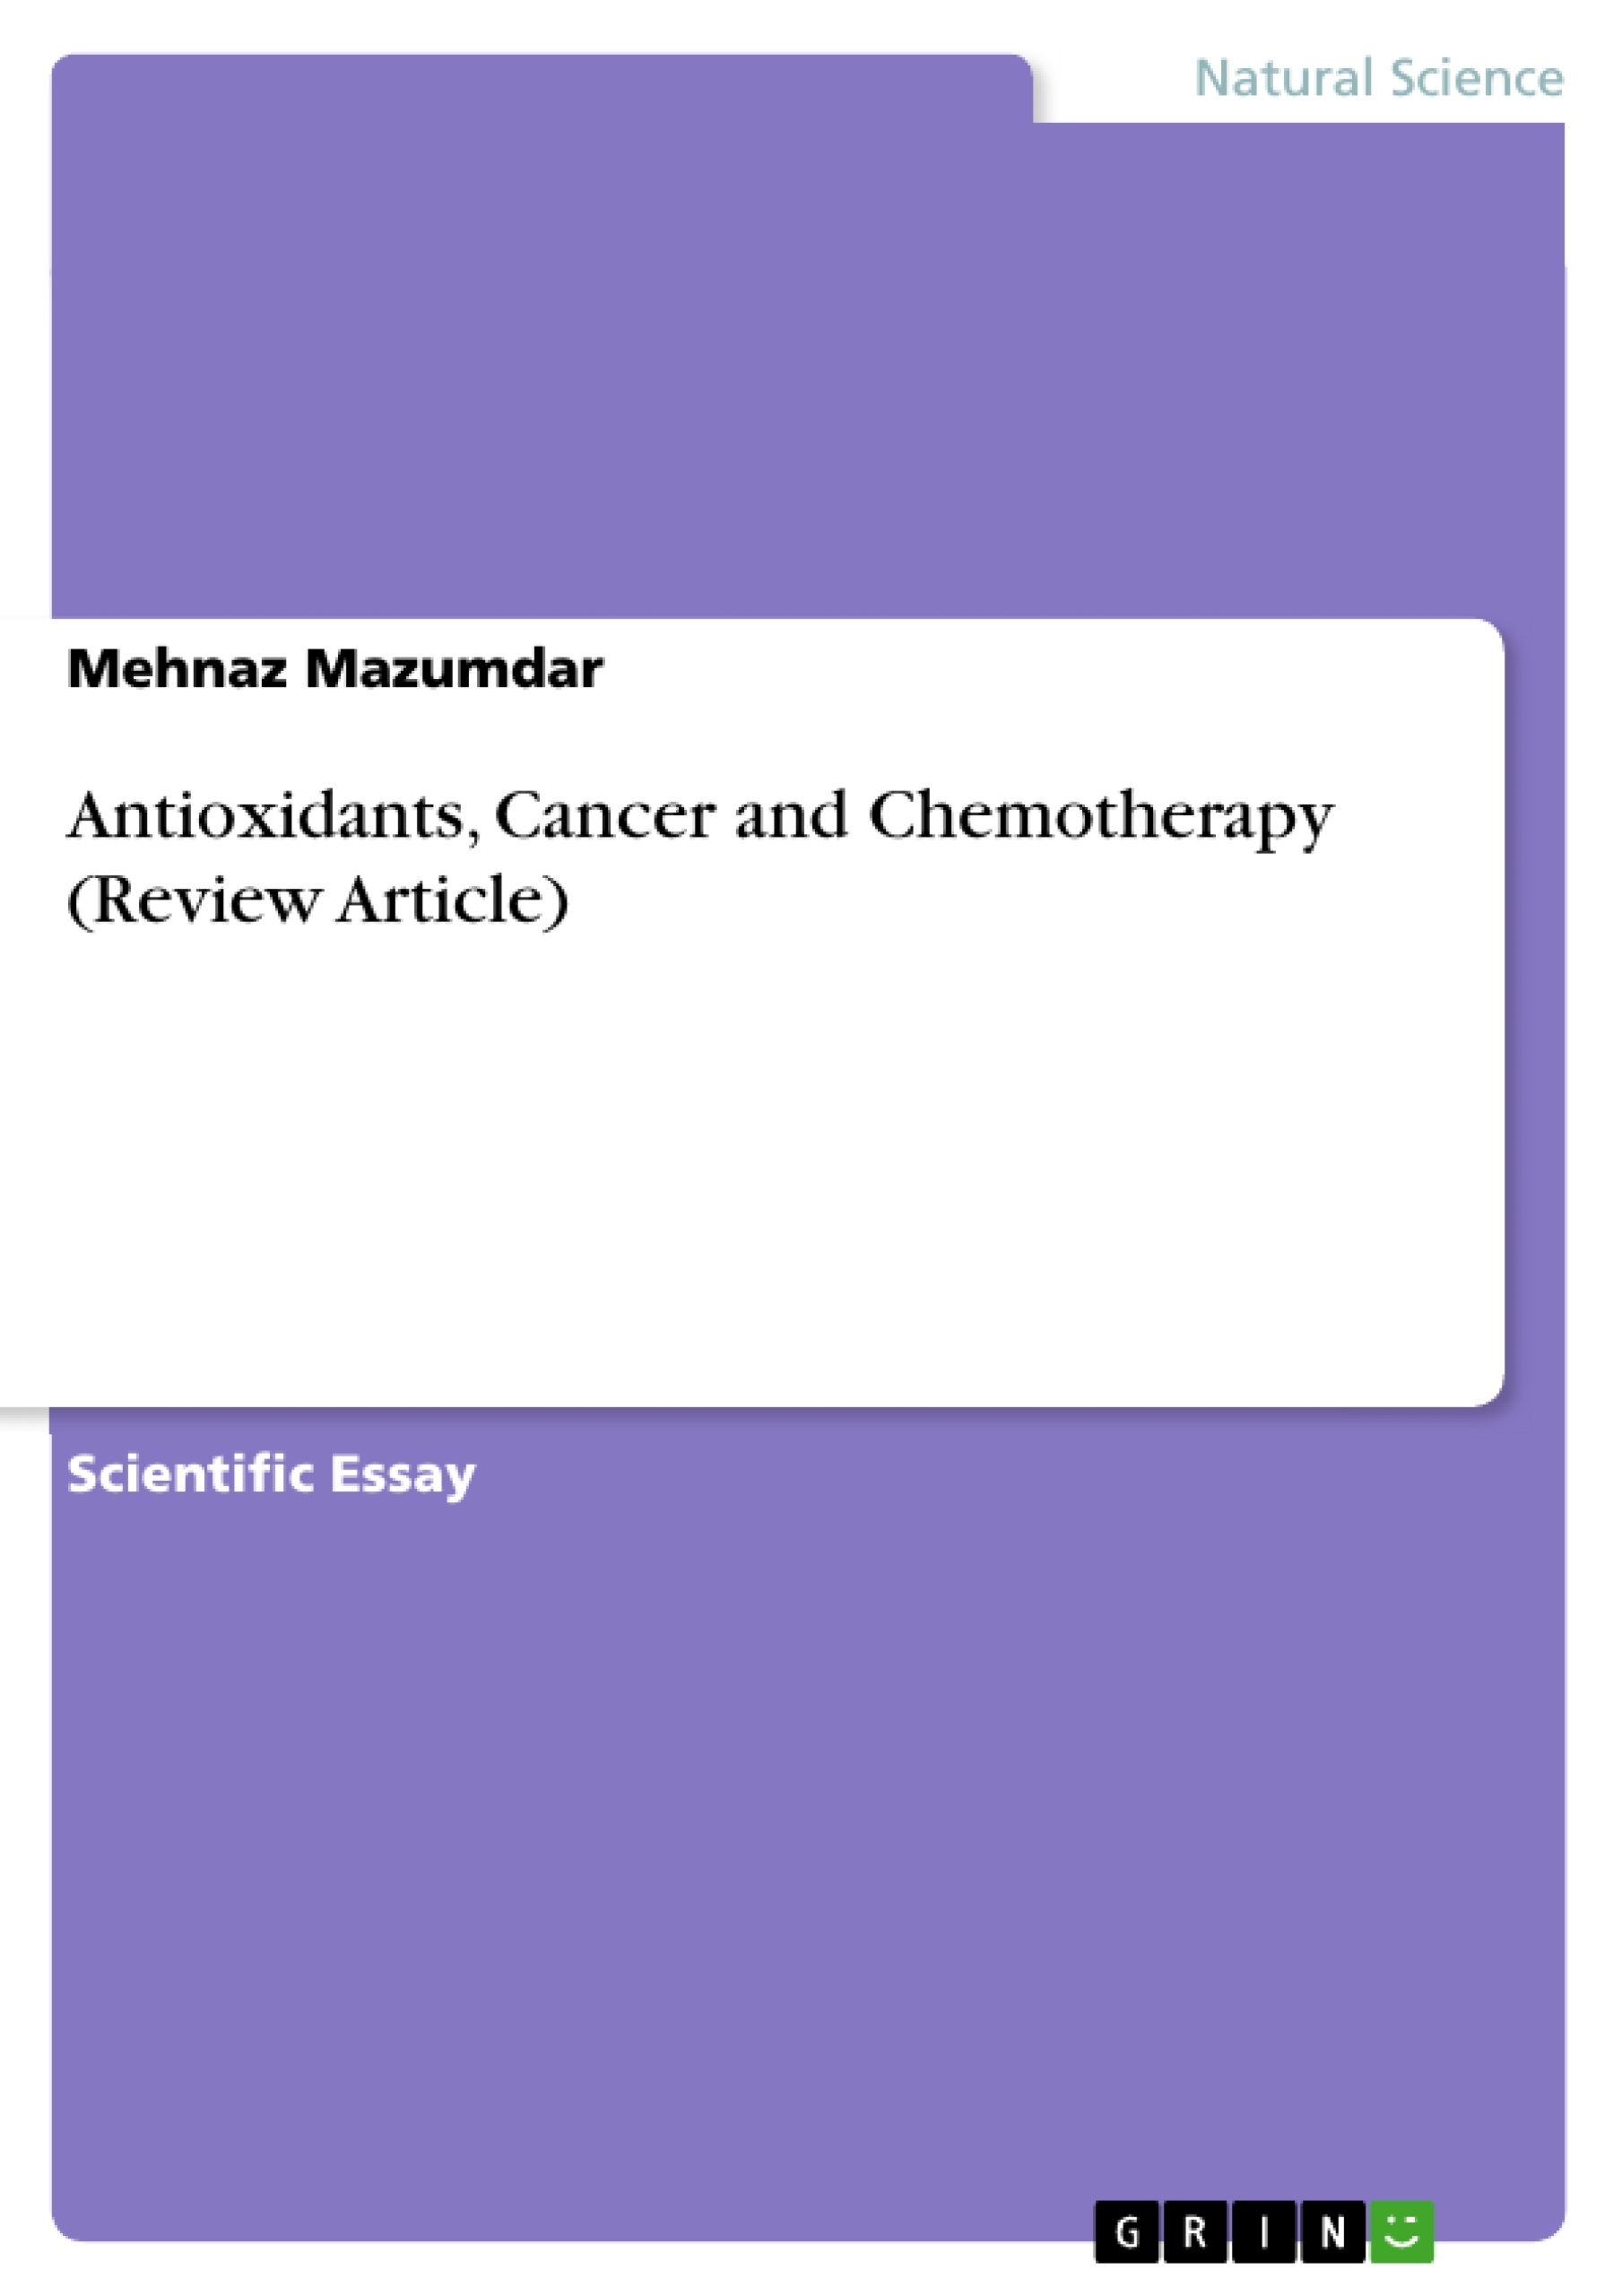 Title: Antioxidants, Cancer and Chemotherapy  (Review Article)  